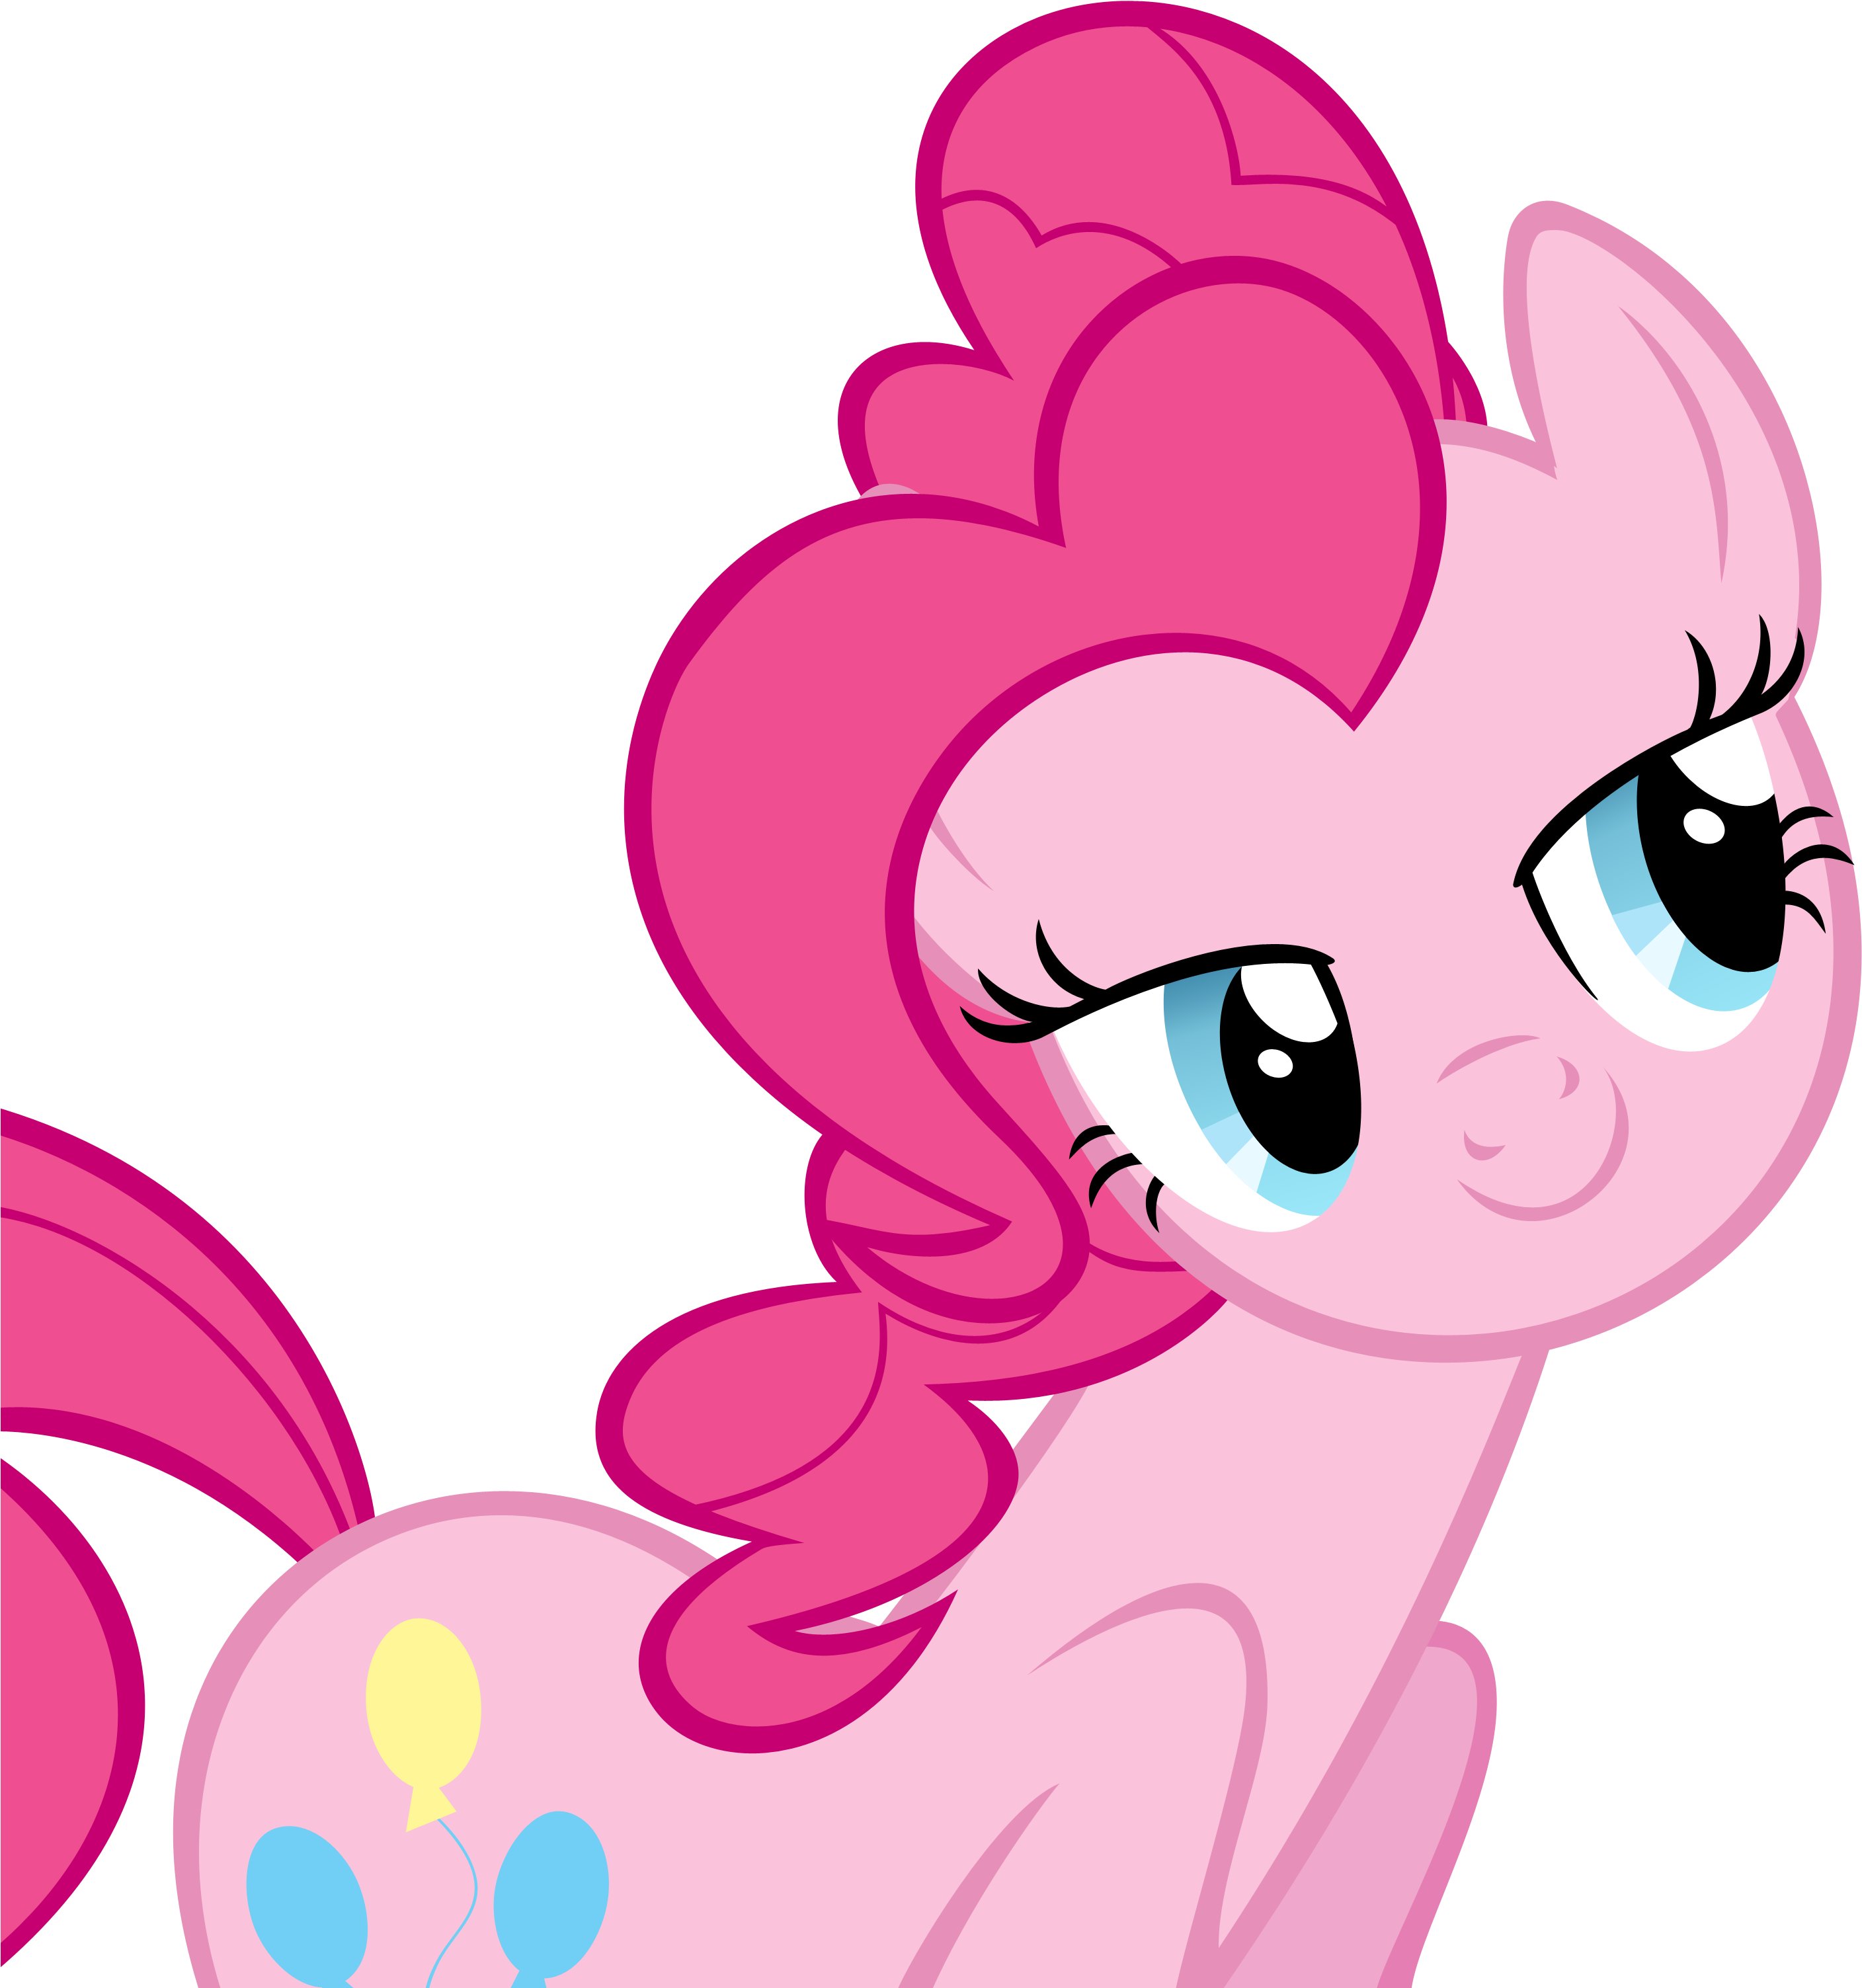 Download and share clipart about Pinkie Pie Applejack My Little Pony Youtub...